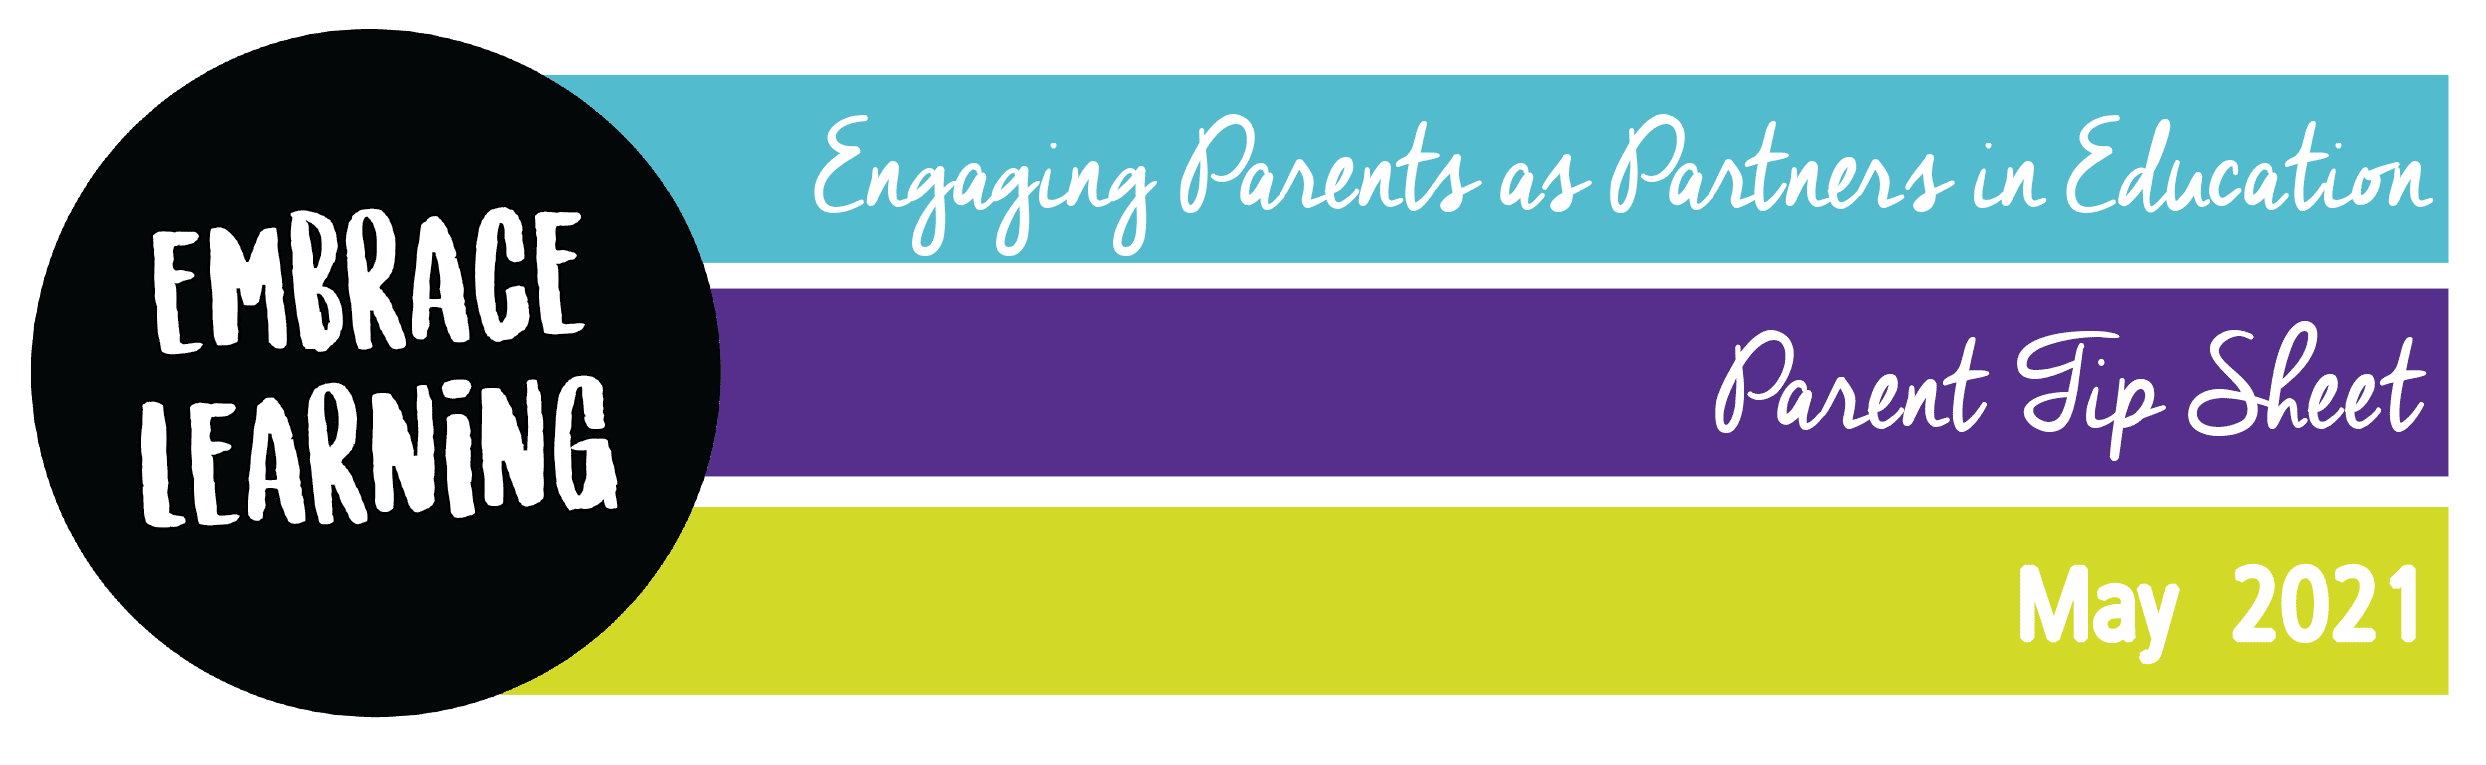 Engaging parents as partners in education. Parent tip sheet, May 2021